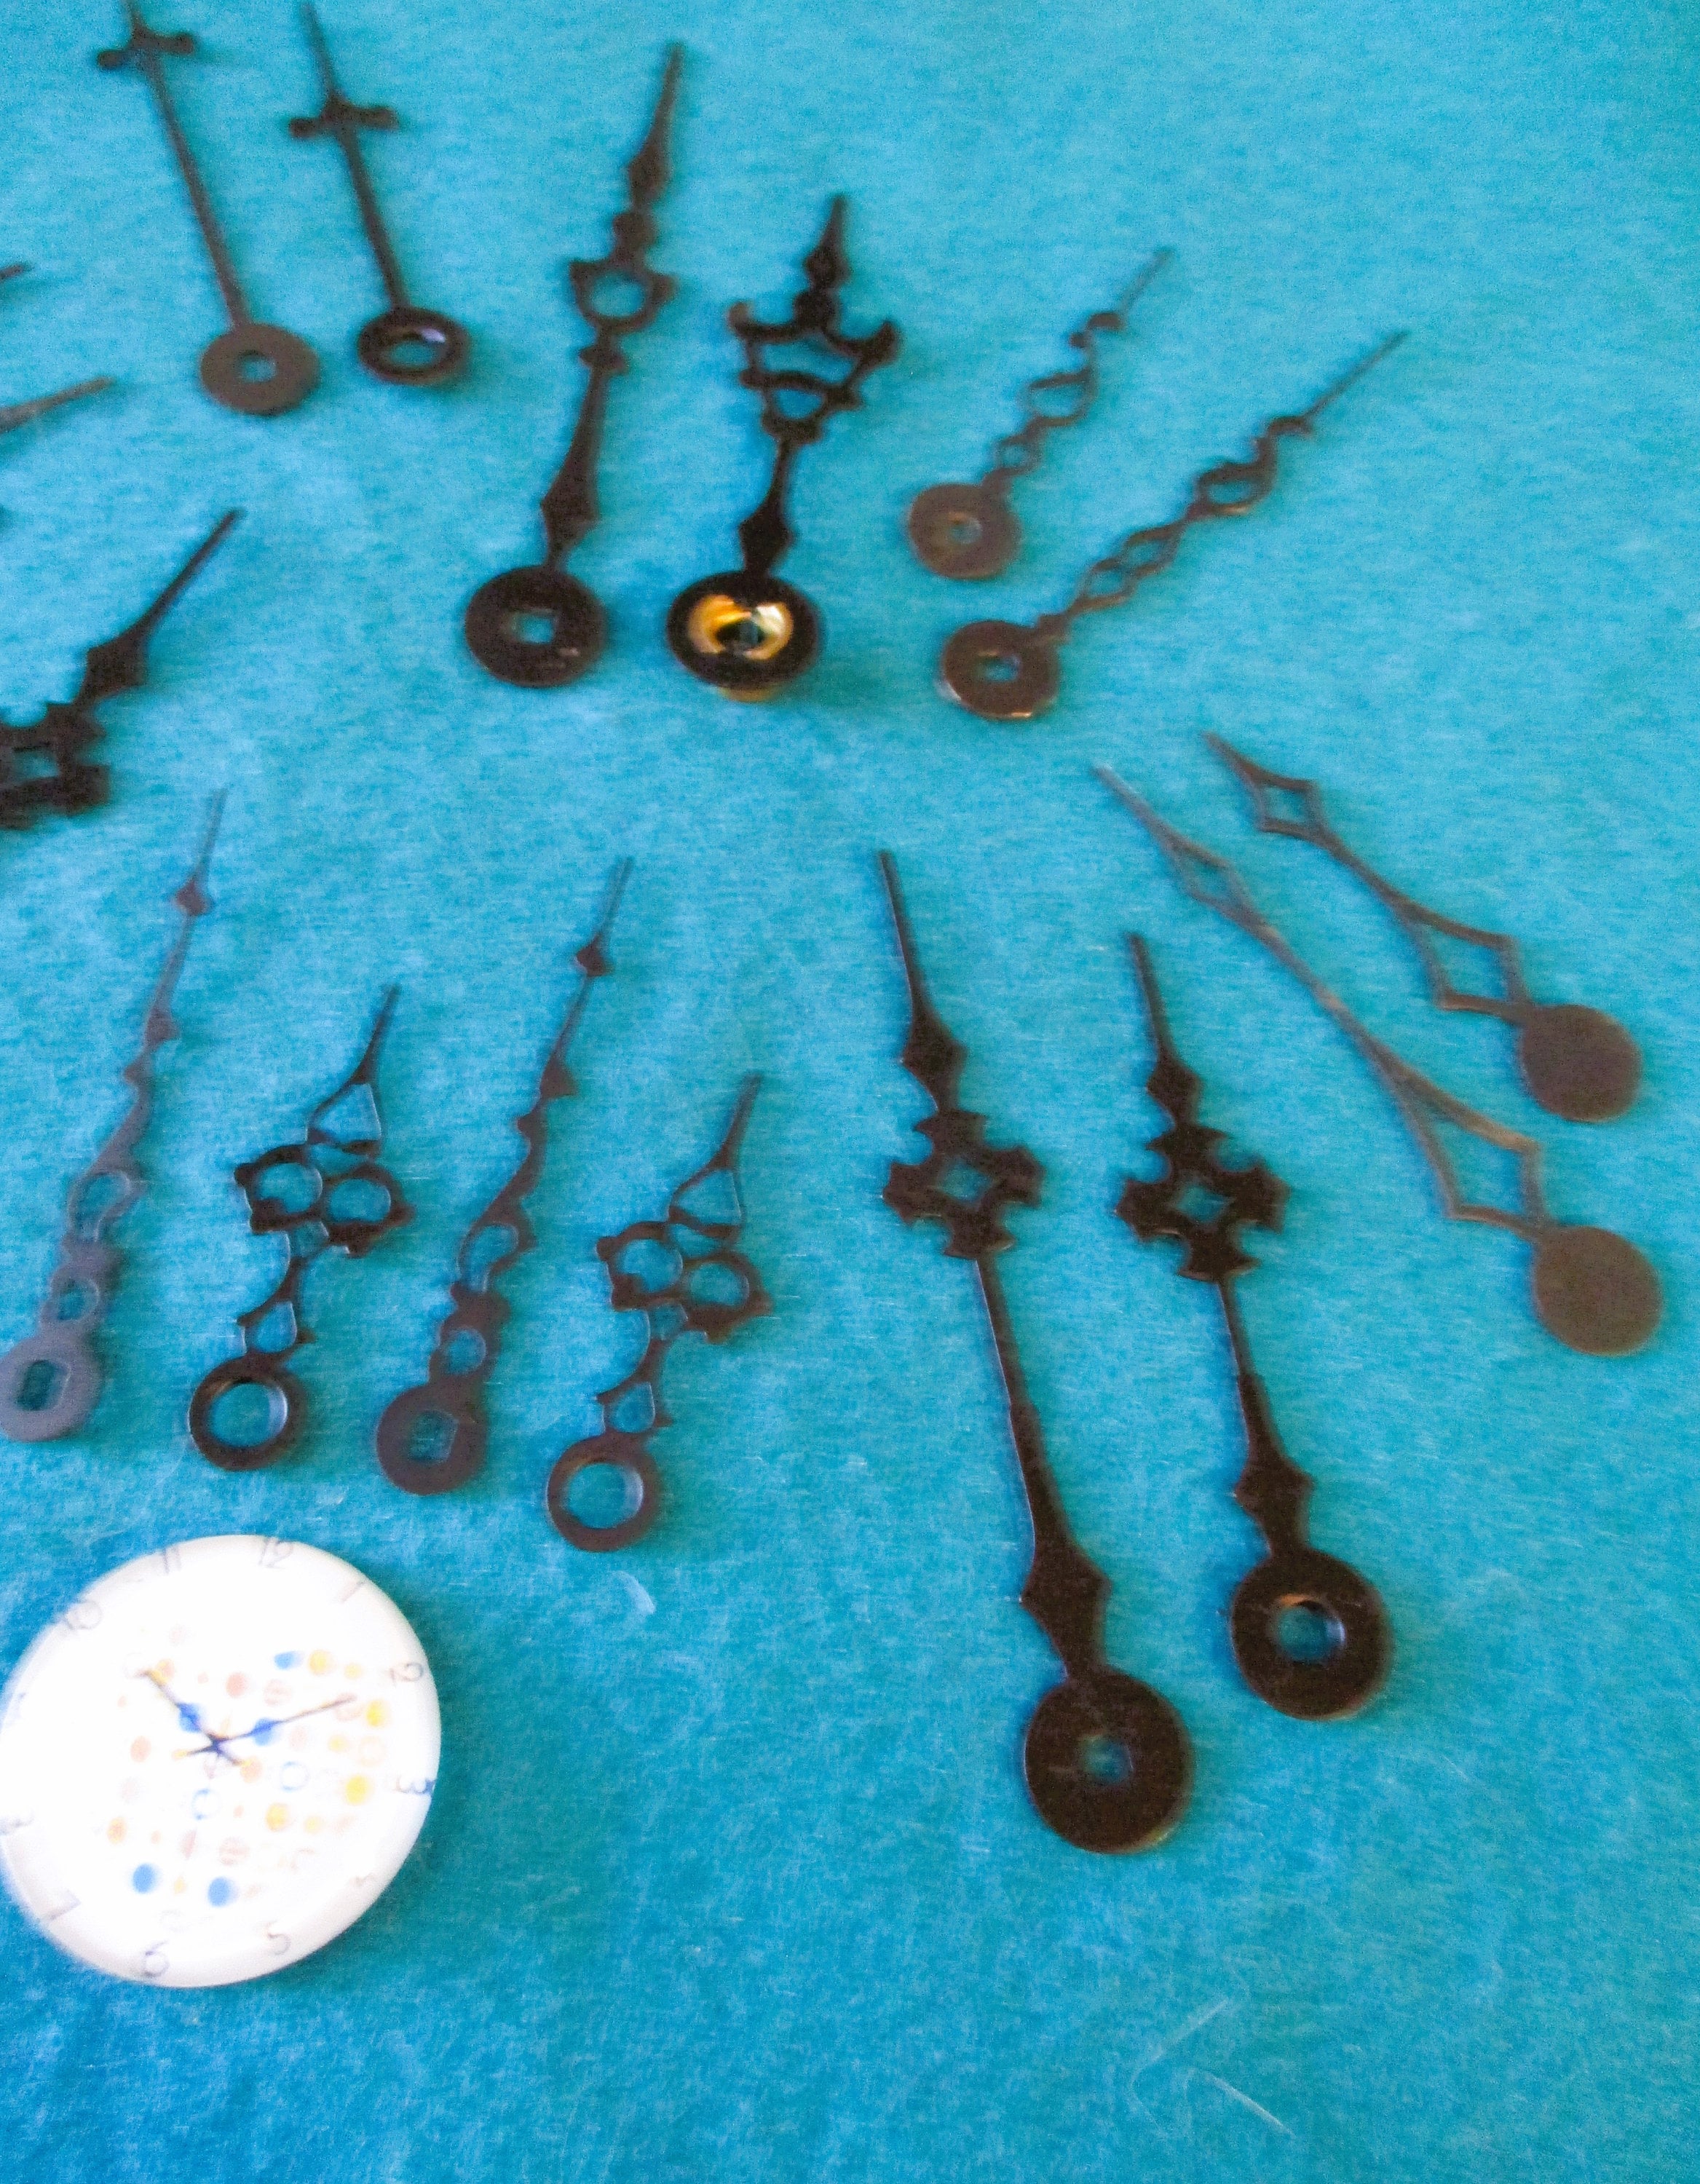 9 Pairs Of Vintage Clock Hands For Your Clock Projects Jewelry Making